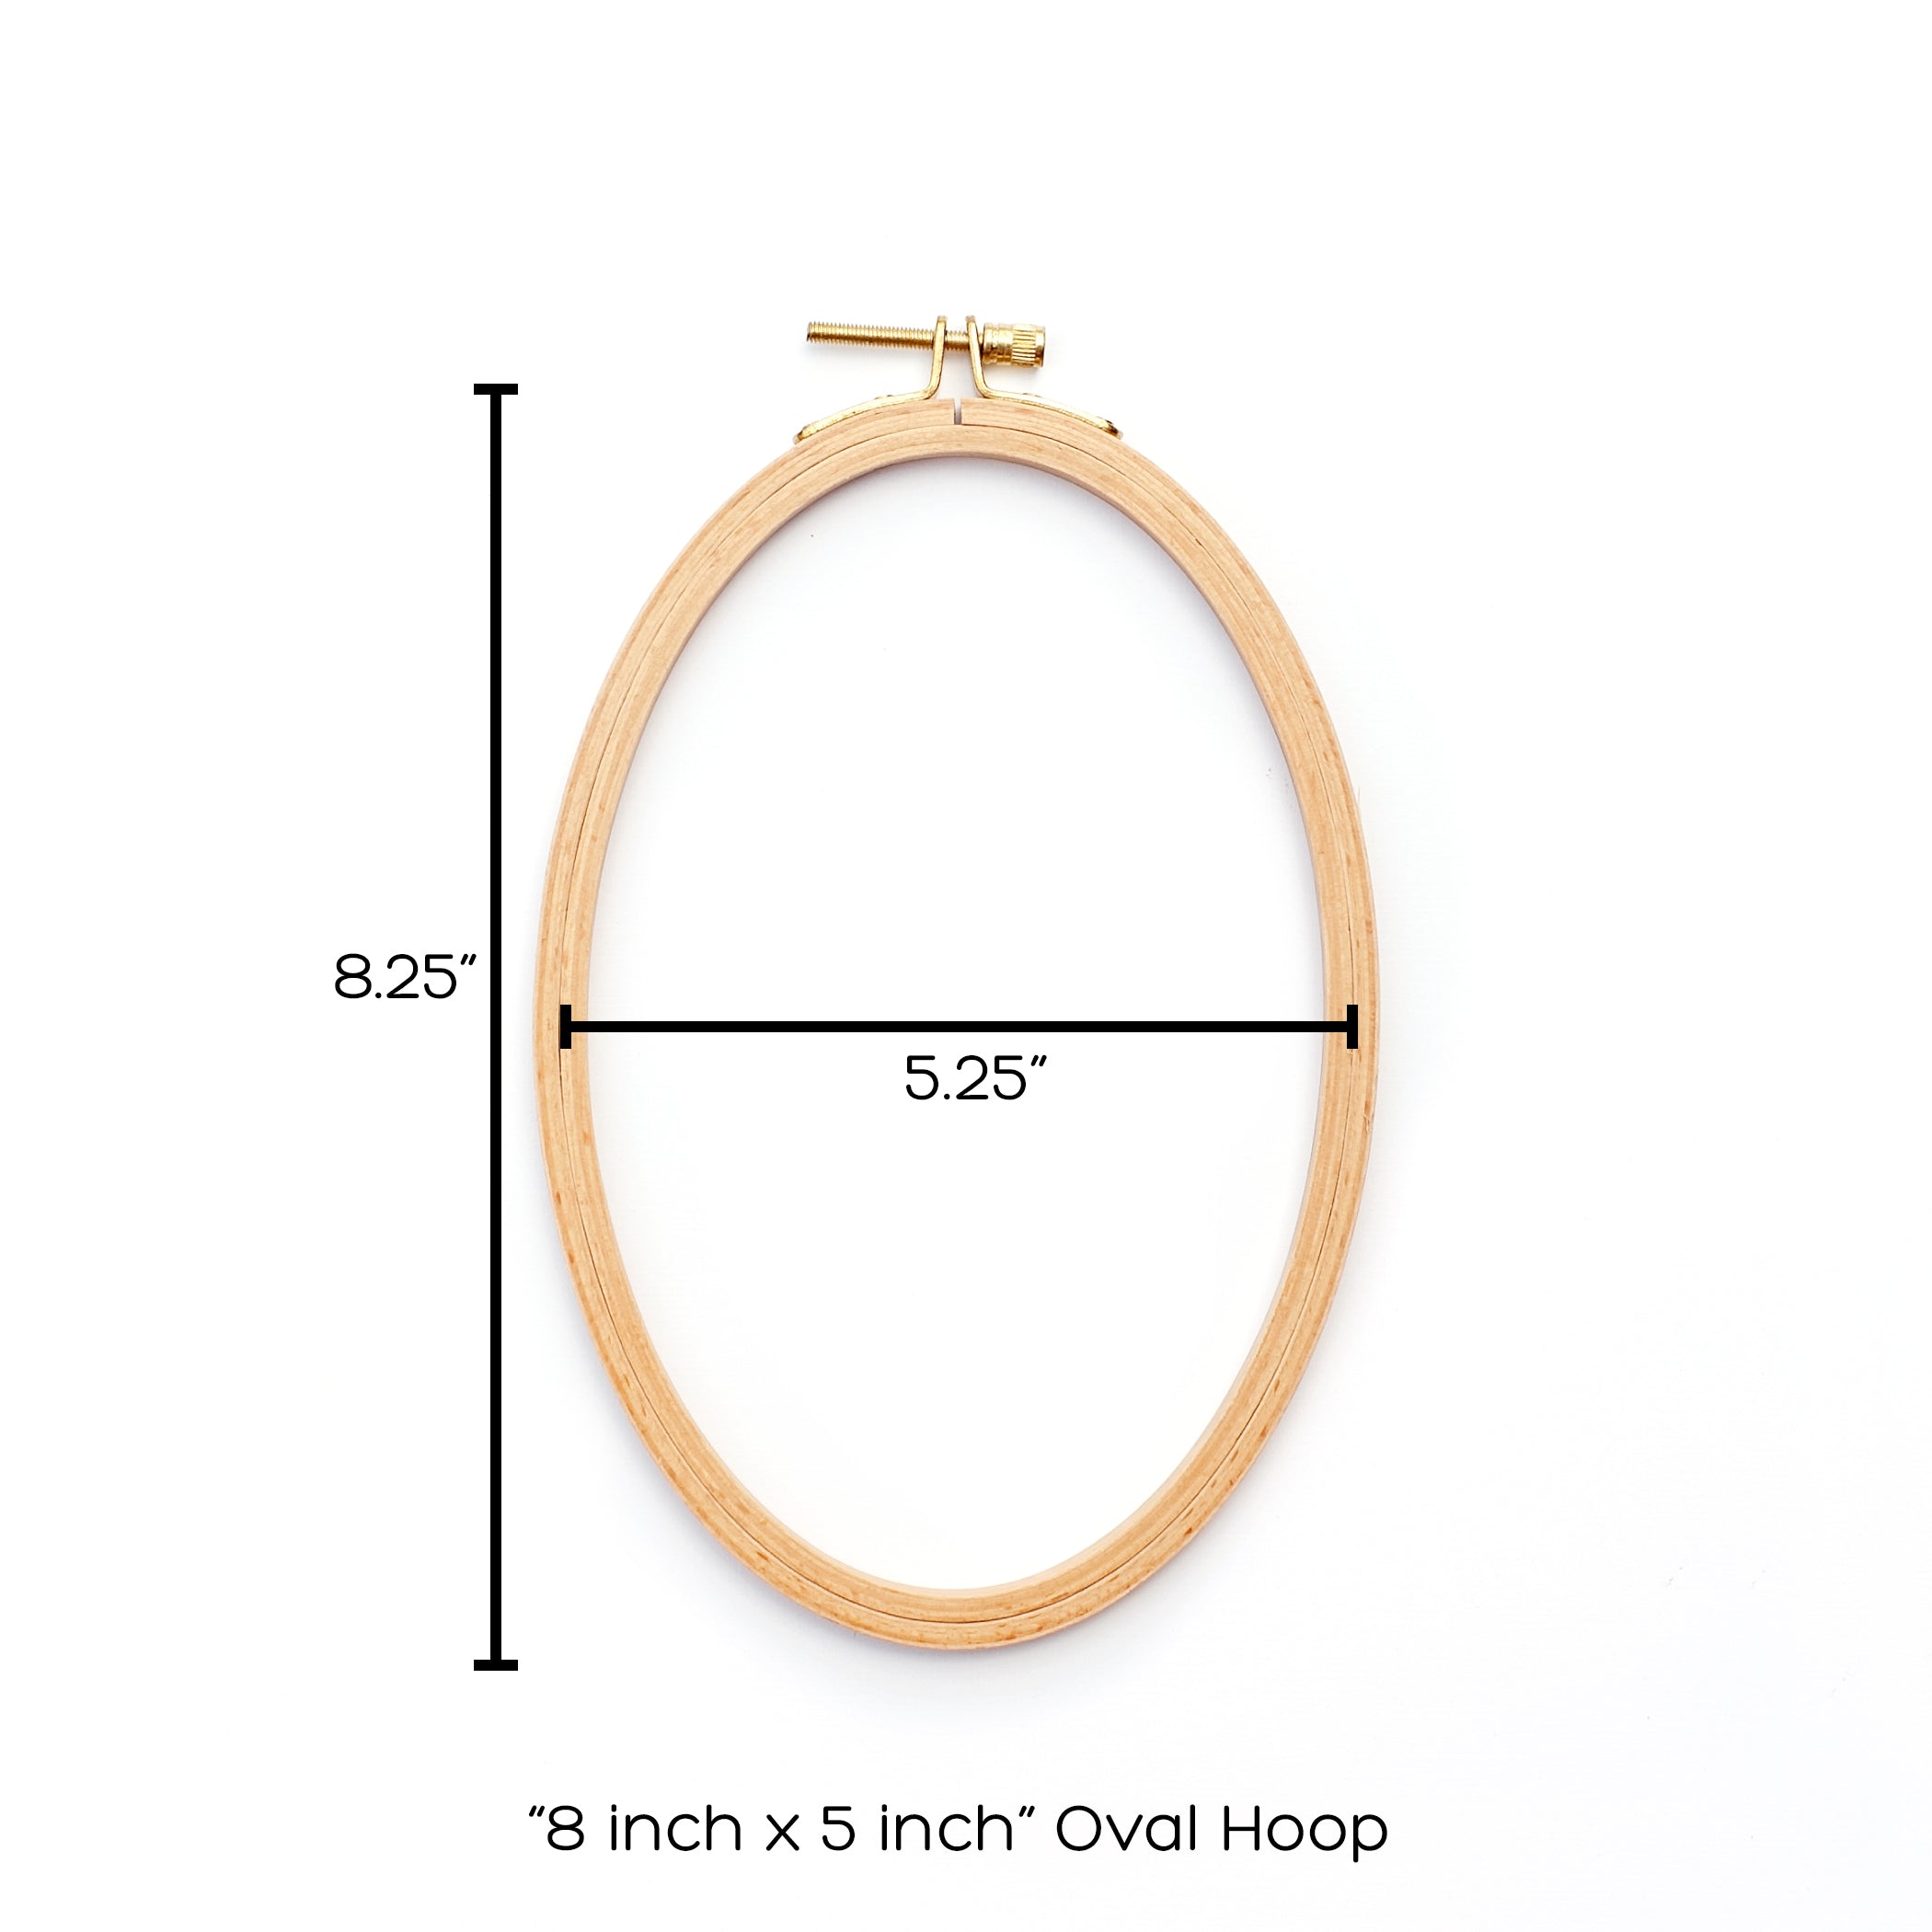 Beech Wood Embroidery Hoop, 2 Packs 6 inch Cross Stitch Hoops, Round Splinters Free for Art Craft Sewing and Embroidery Hoop Decorative Hanging